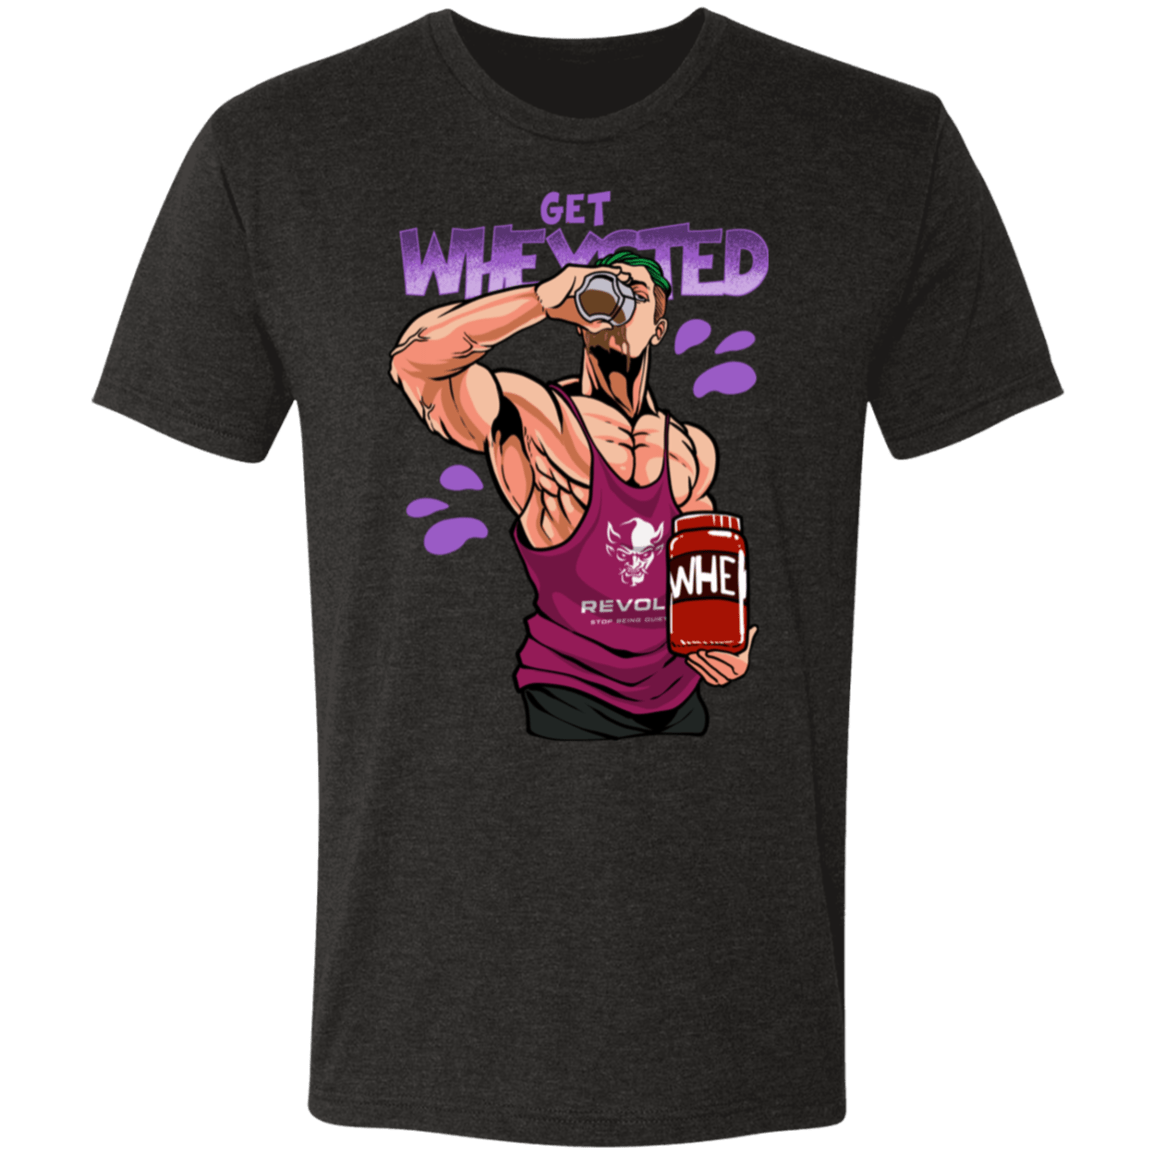 Get Wheysted Gym Tee - T-Shirts